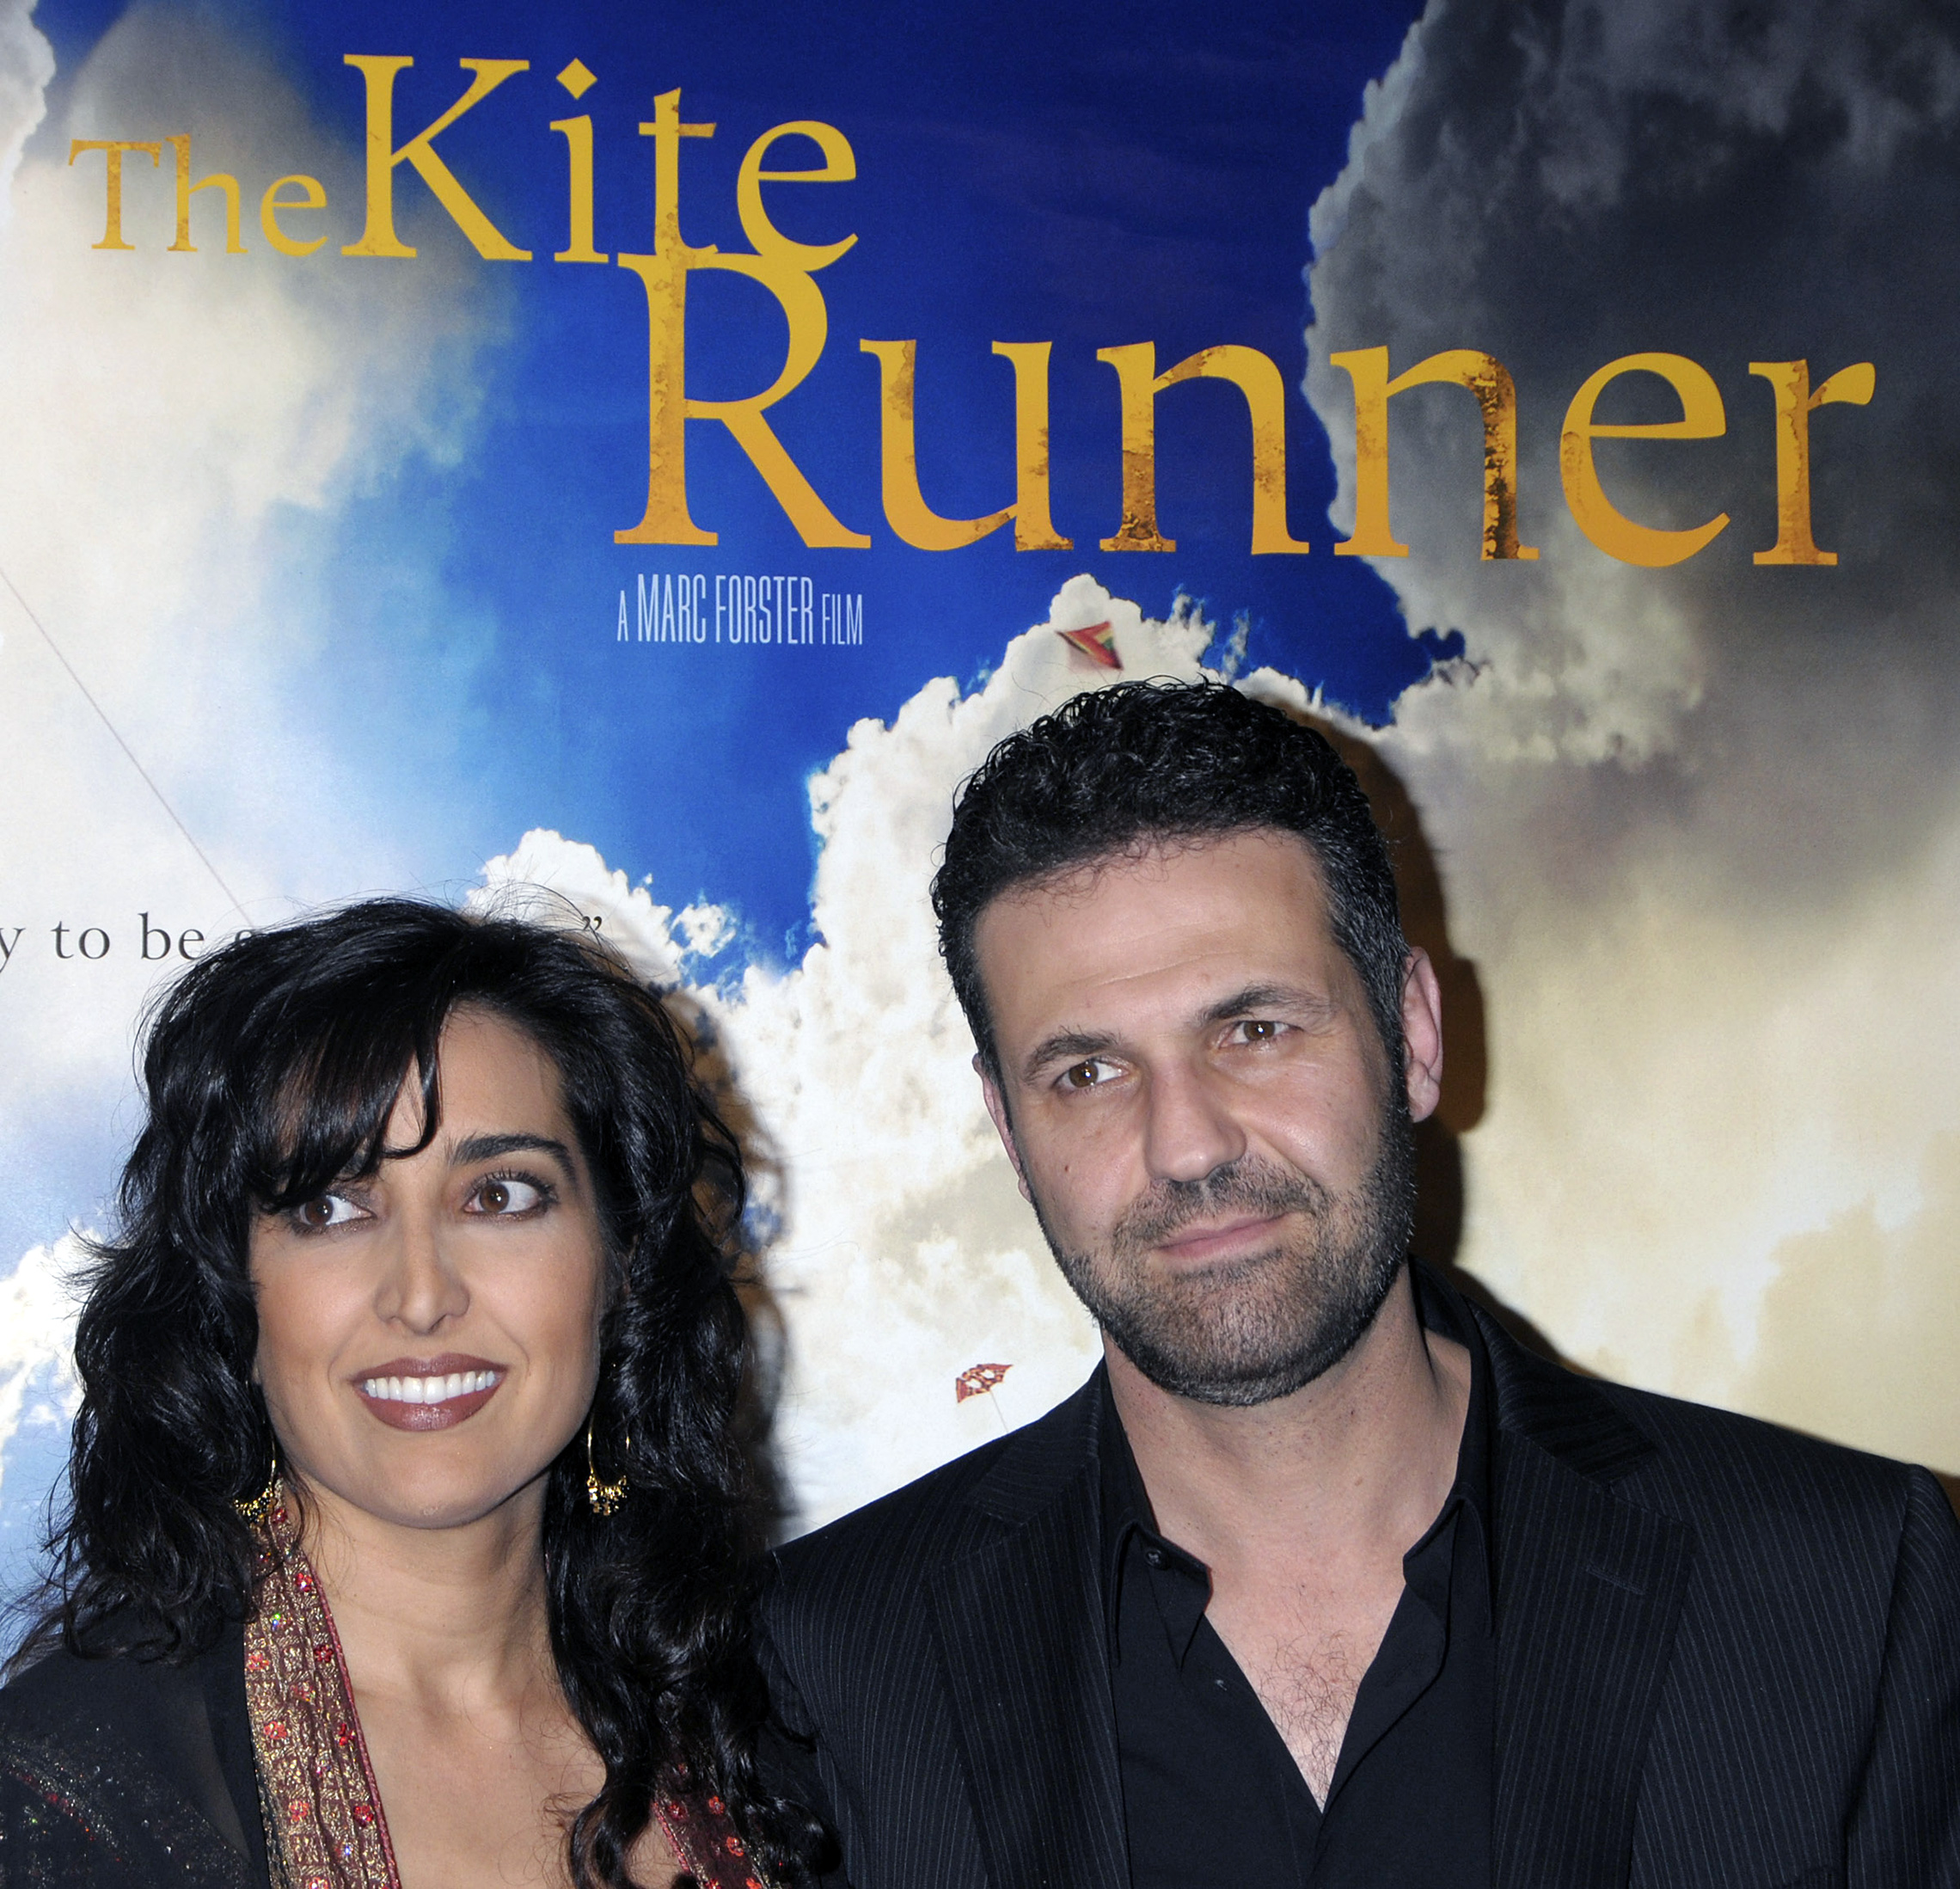 Khaled Hosseini and his wife Roya at the premiere of The Kite Runner in Hollywood. (AP Images/Tammie Arroyo)